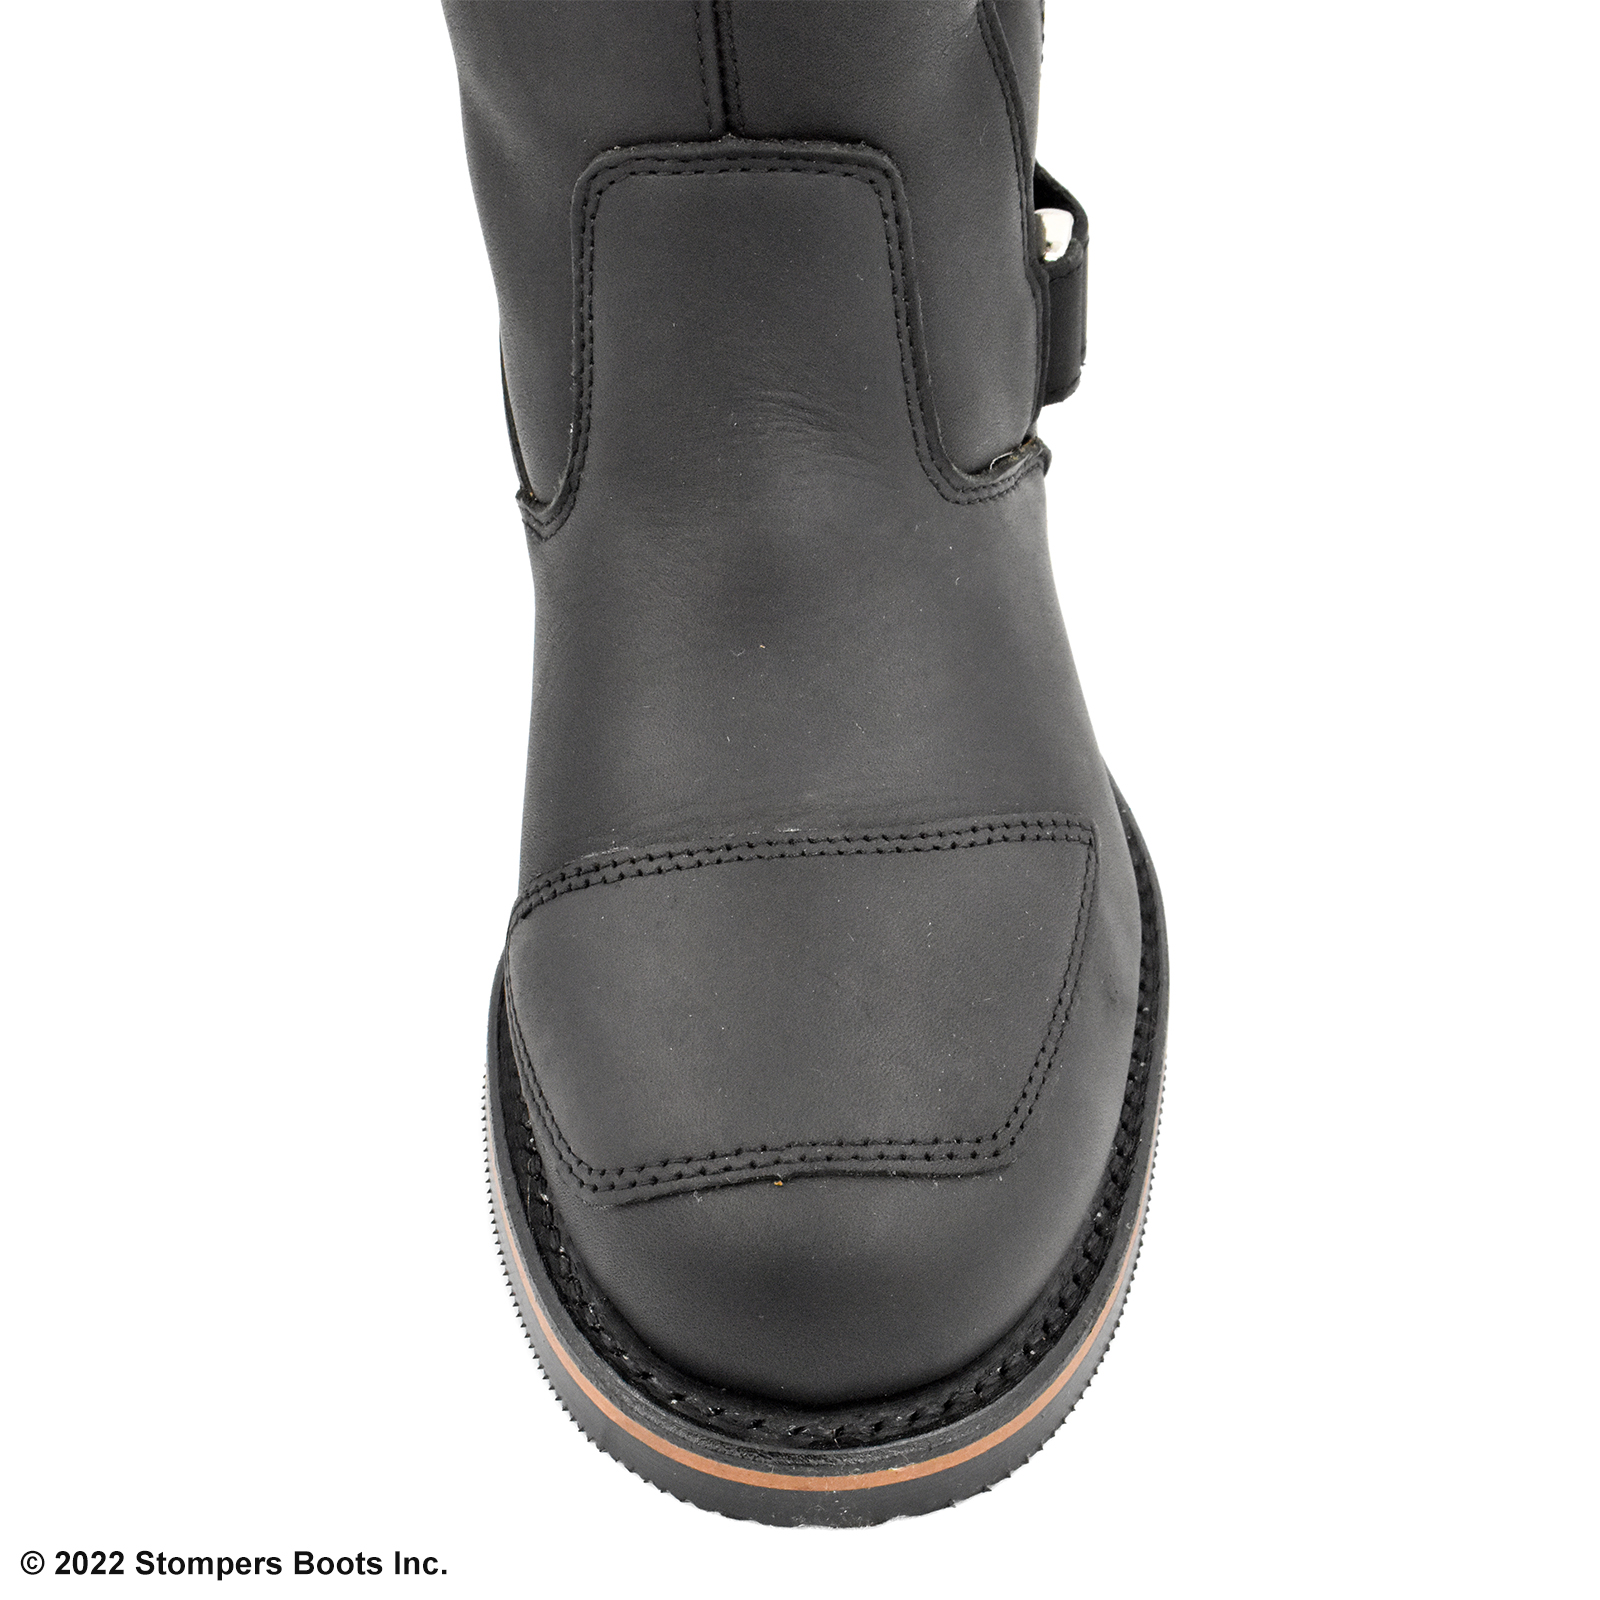 Shop The Chippewa 12-Inch Rally Black Boots | Stompers Boots